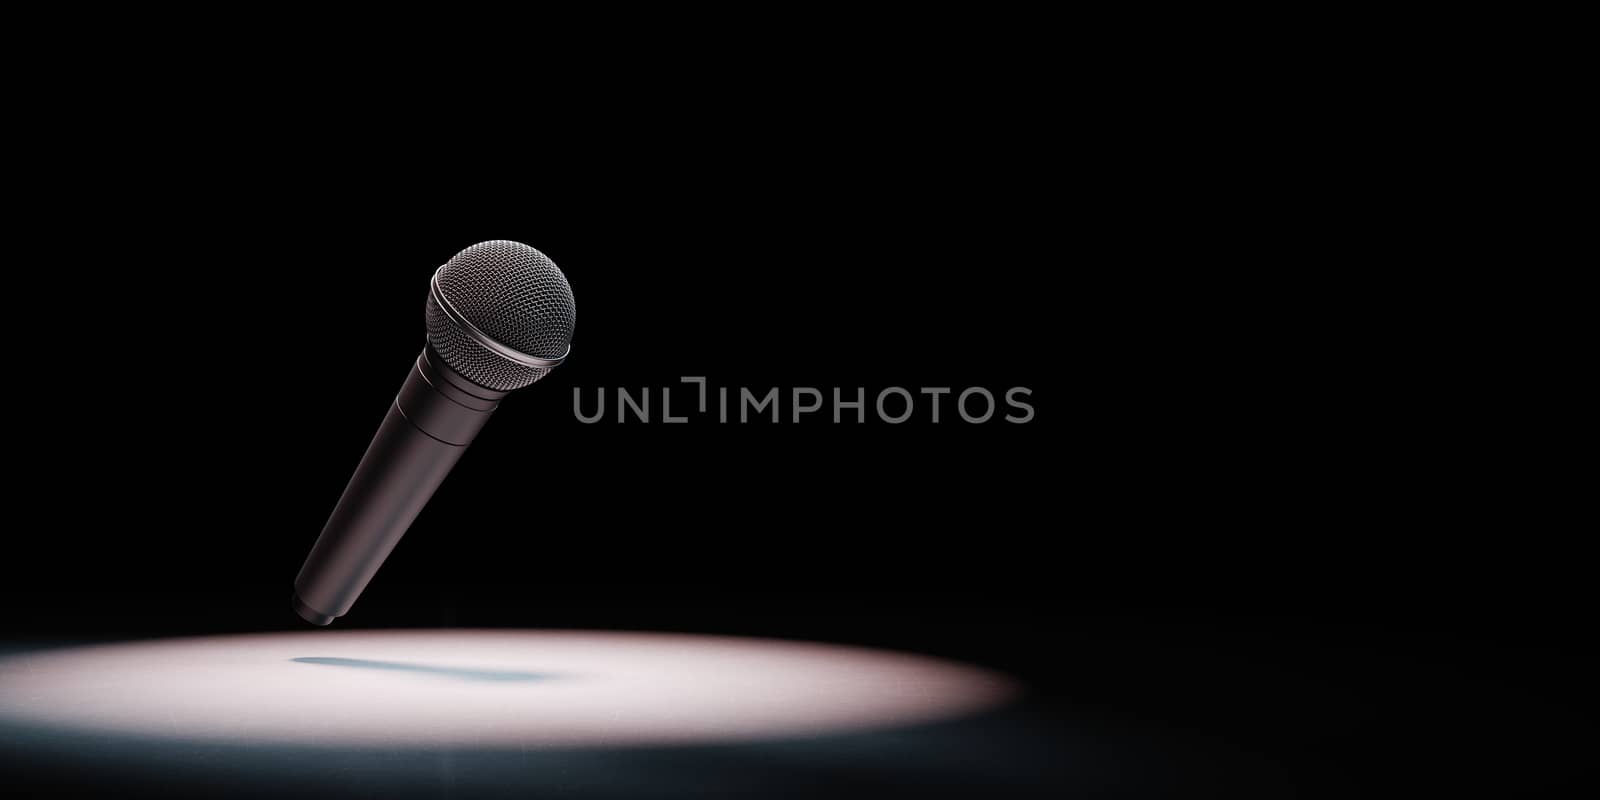 Metallic Microphone Spotlighted on Black Background with Copy Space 3D Illustration